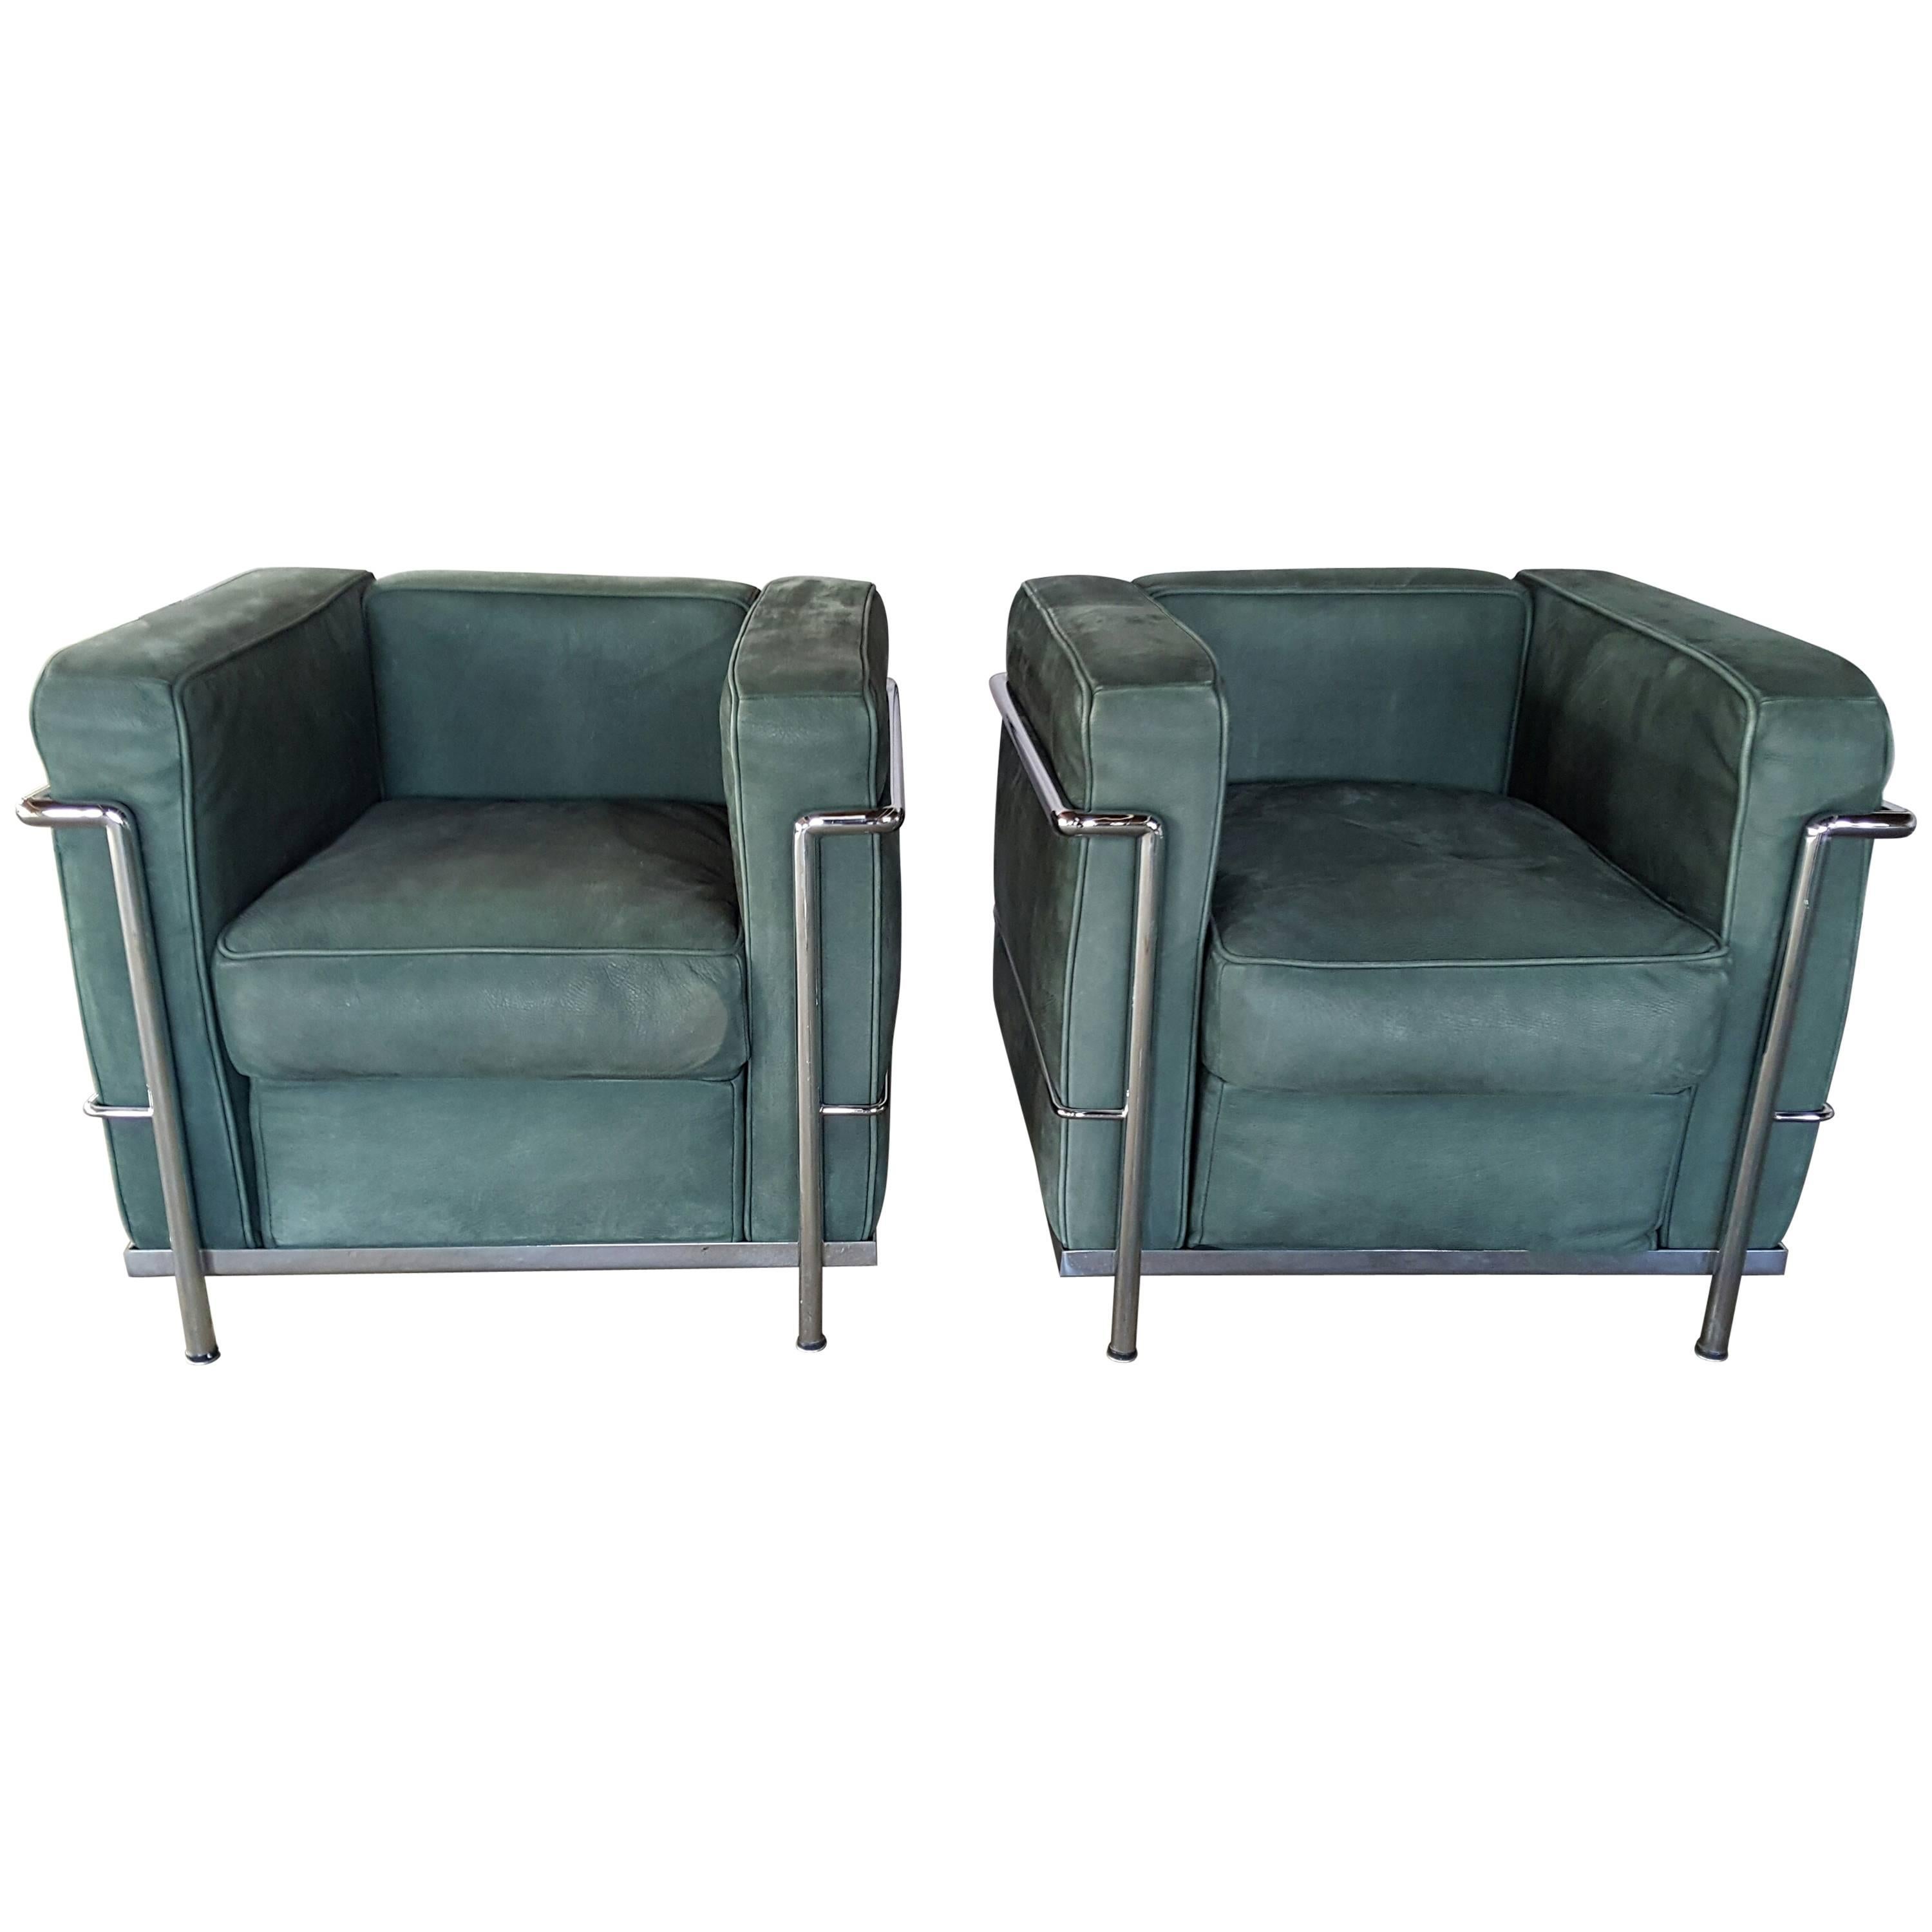 Pair of Le Corbusier Lc2 Lounge Chairs, Green Suede and Chrome